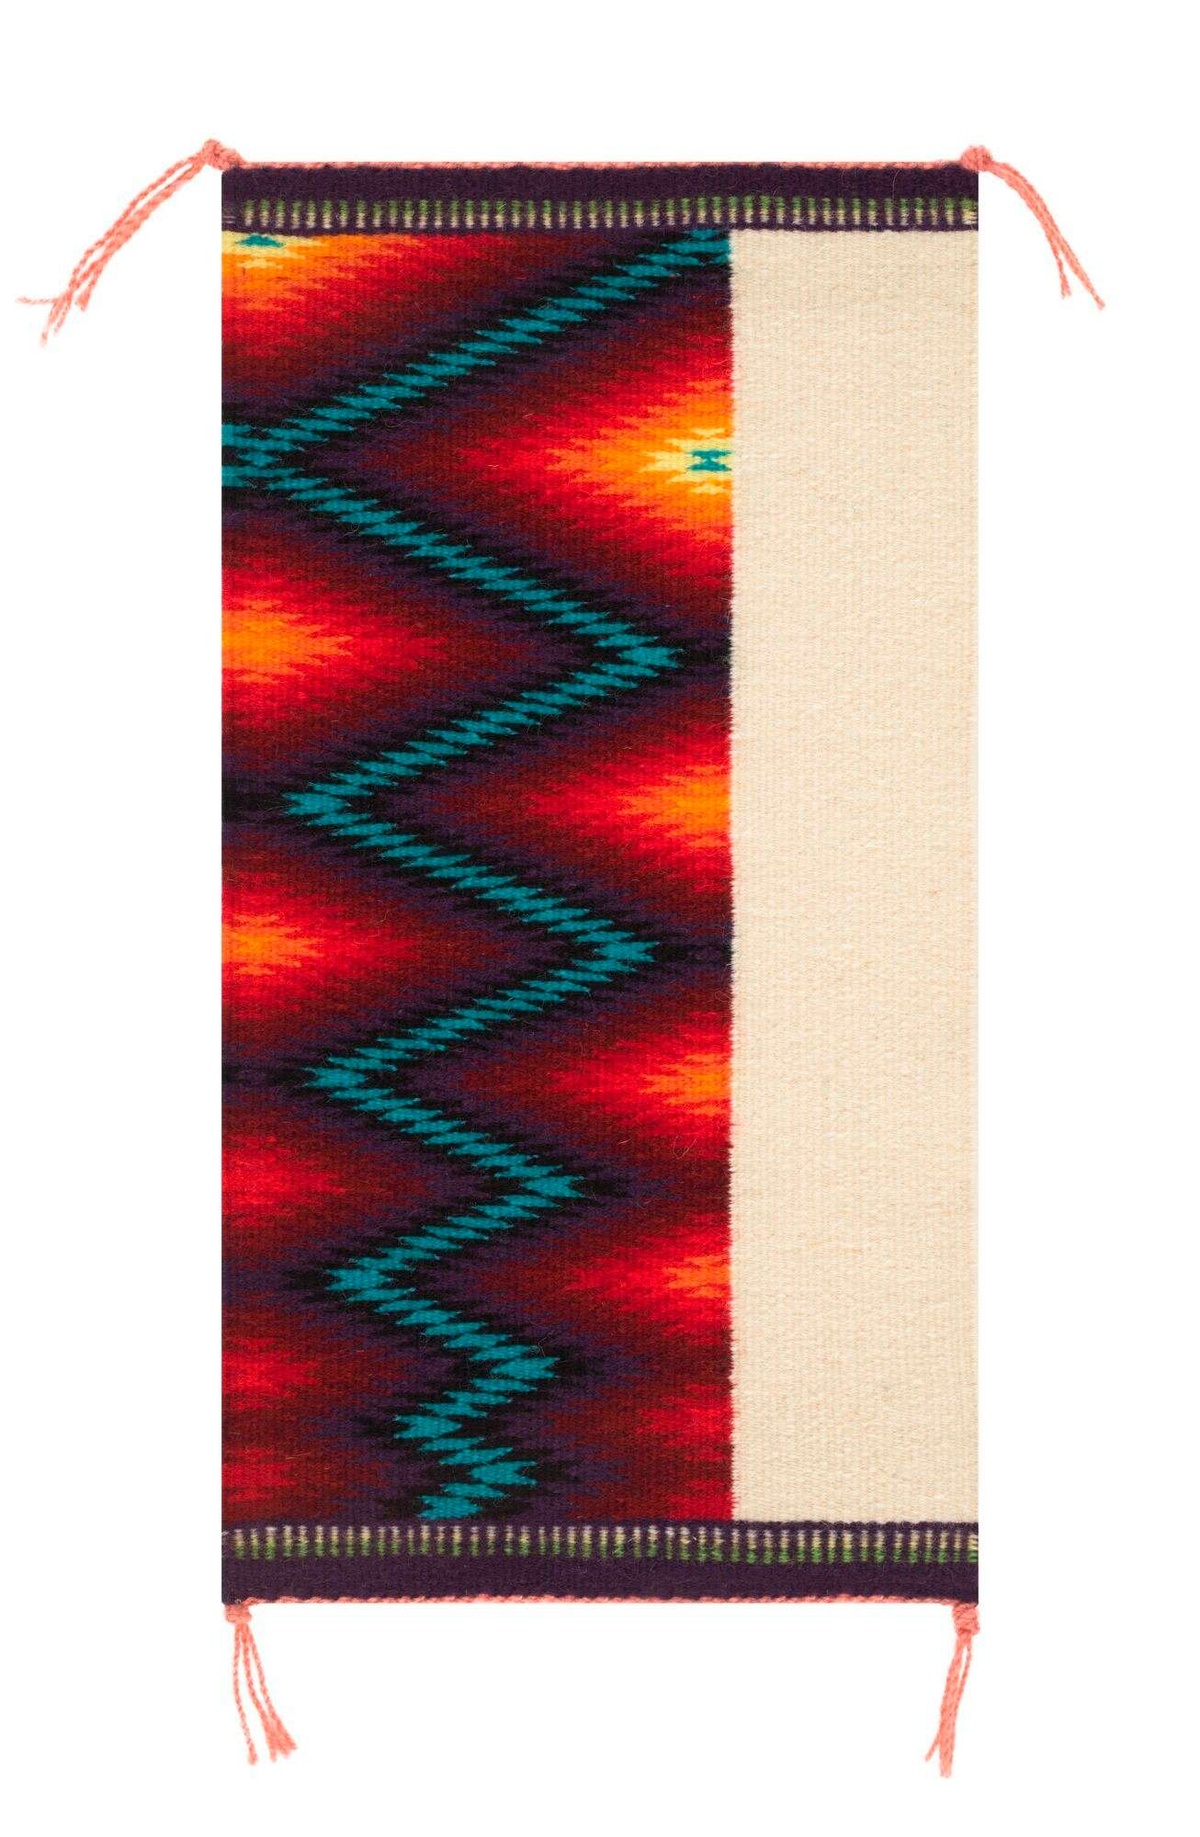 A long wall hanging woven by artist Melissa Cody. It is bisected by two patterns: a cream-colored slim block on the right side and a thicker, warm-colored block with a blue zig-zag pattern on the left side.